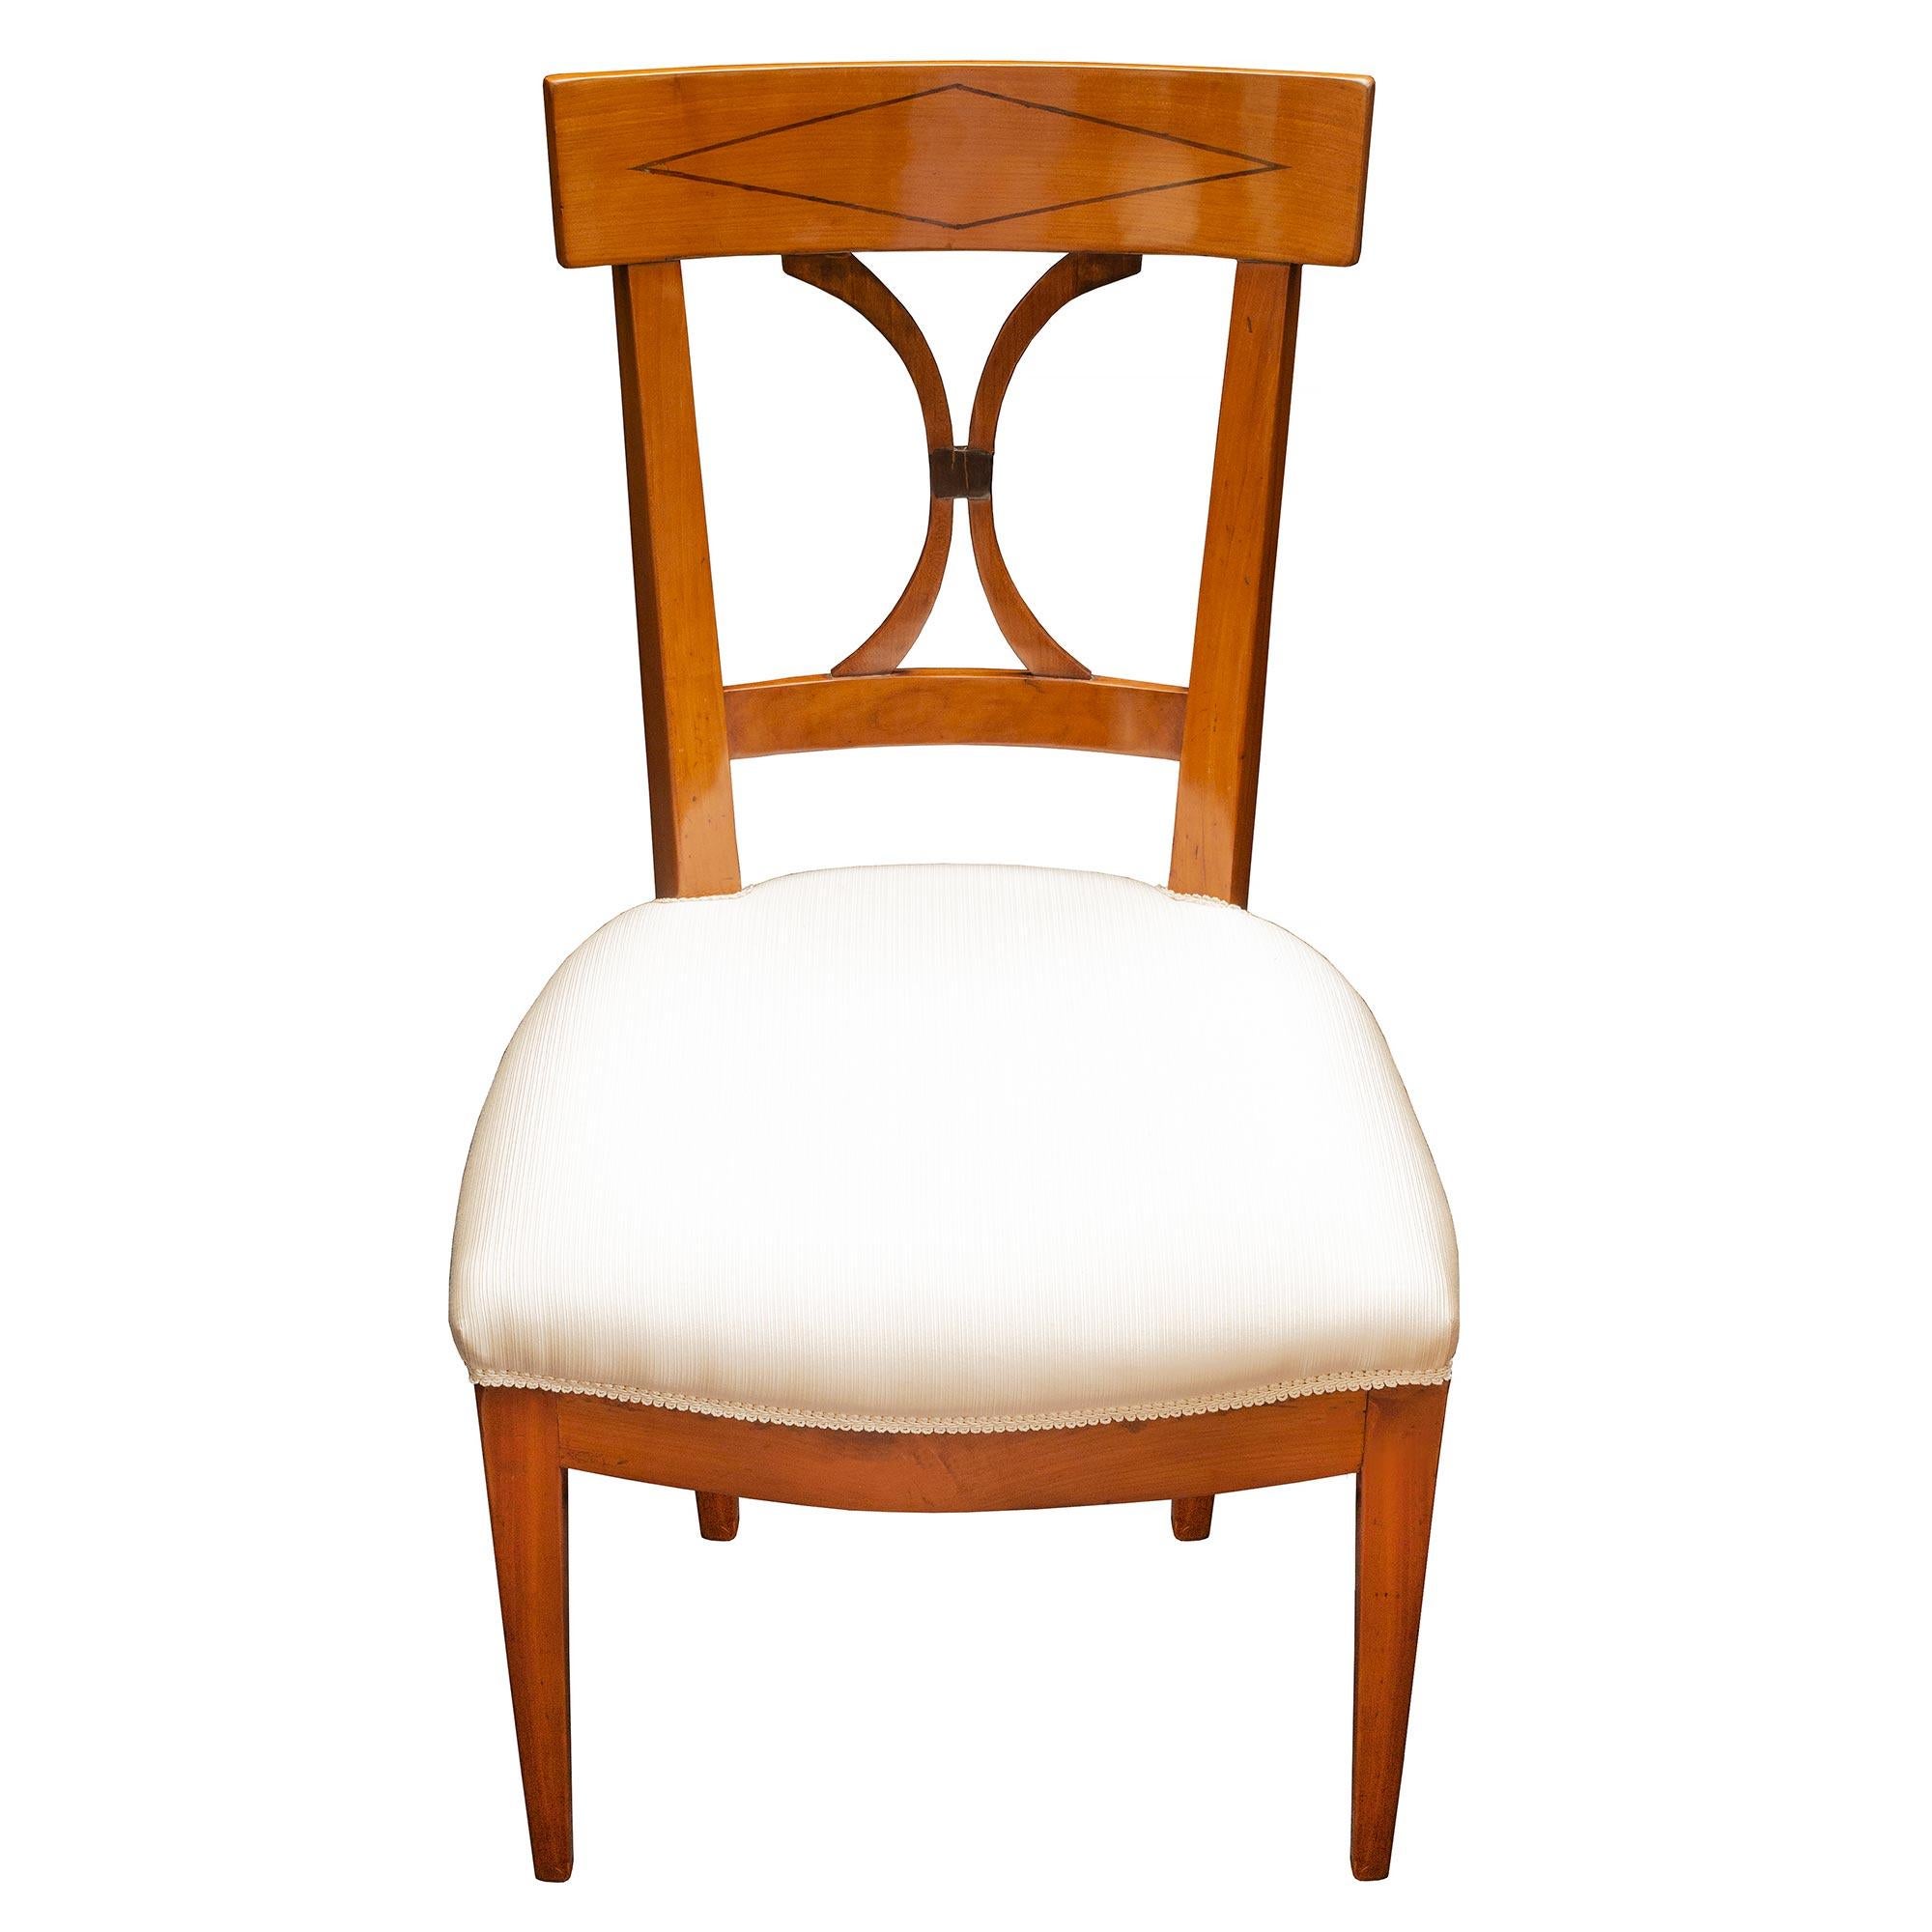 An elegant and unusual pair of 19th century, French Directoire st. cherry wood chair. The chairs are raised by slightly curved legs below a stunning straight apron with an attractive curved shape at the front. The pierced back has a most elegant